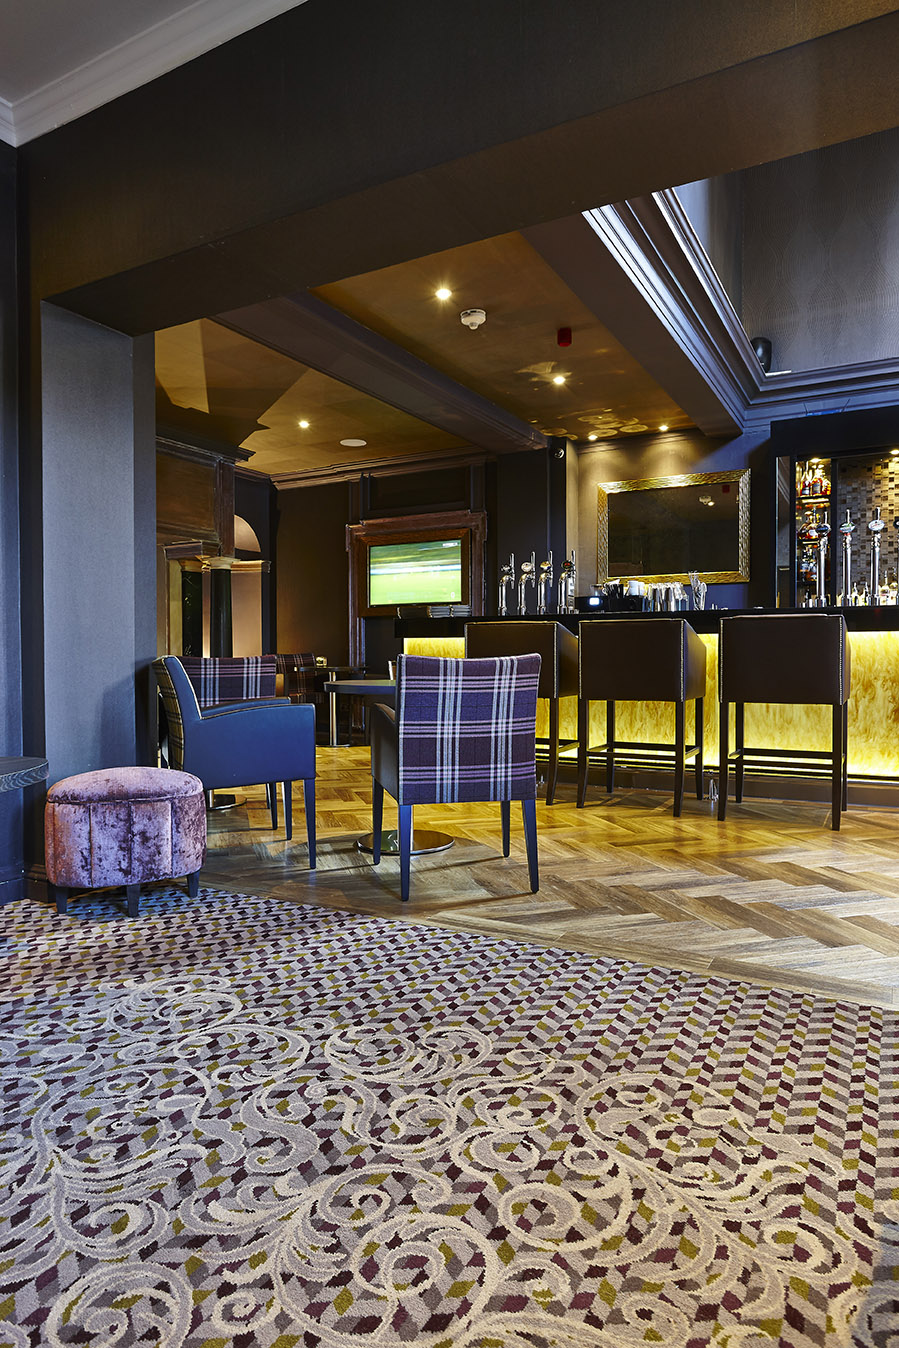 Abbey House Hotel bespoke bar carpet, with grey and cream floral patterns, designed by Wilton Carpets